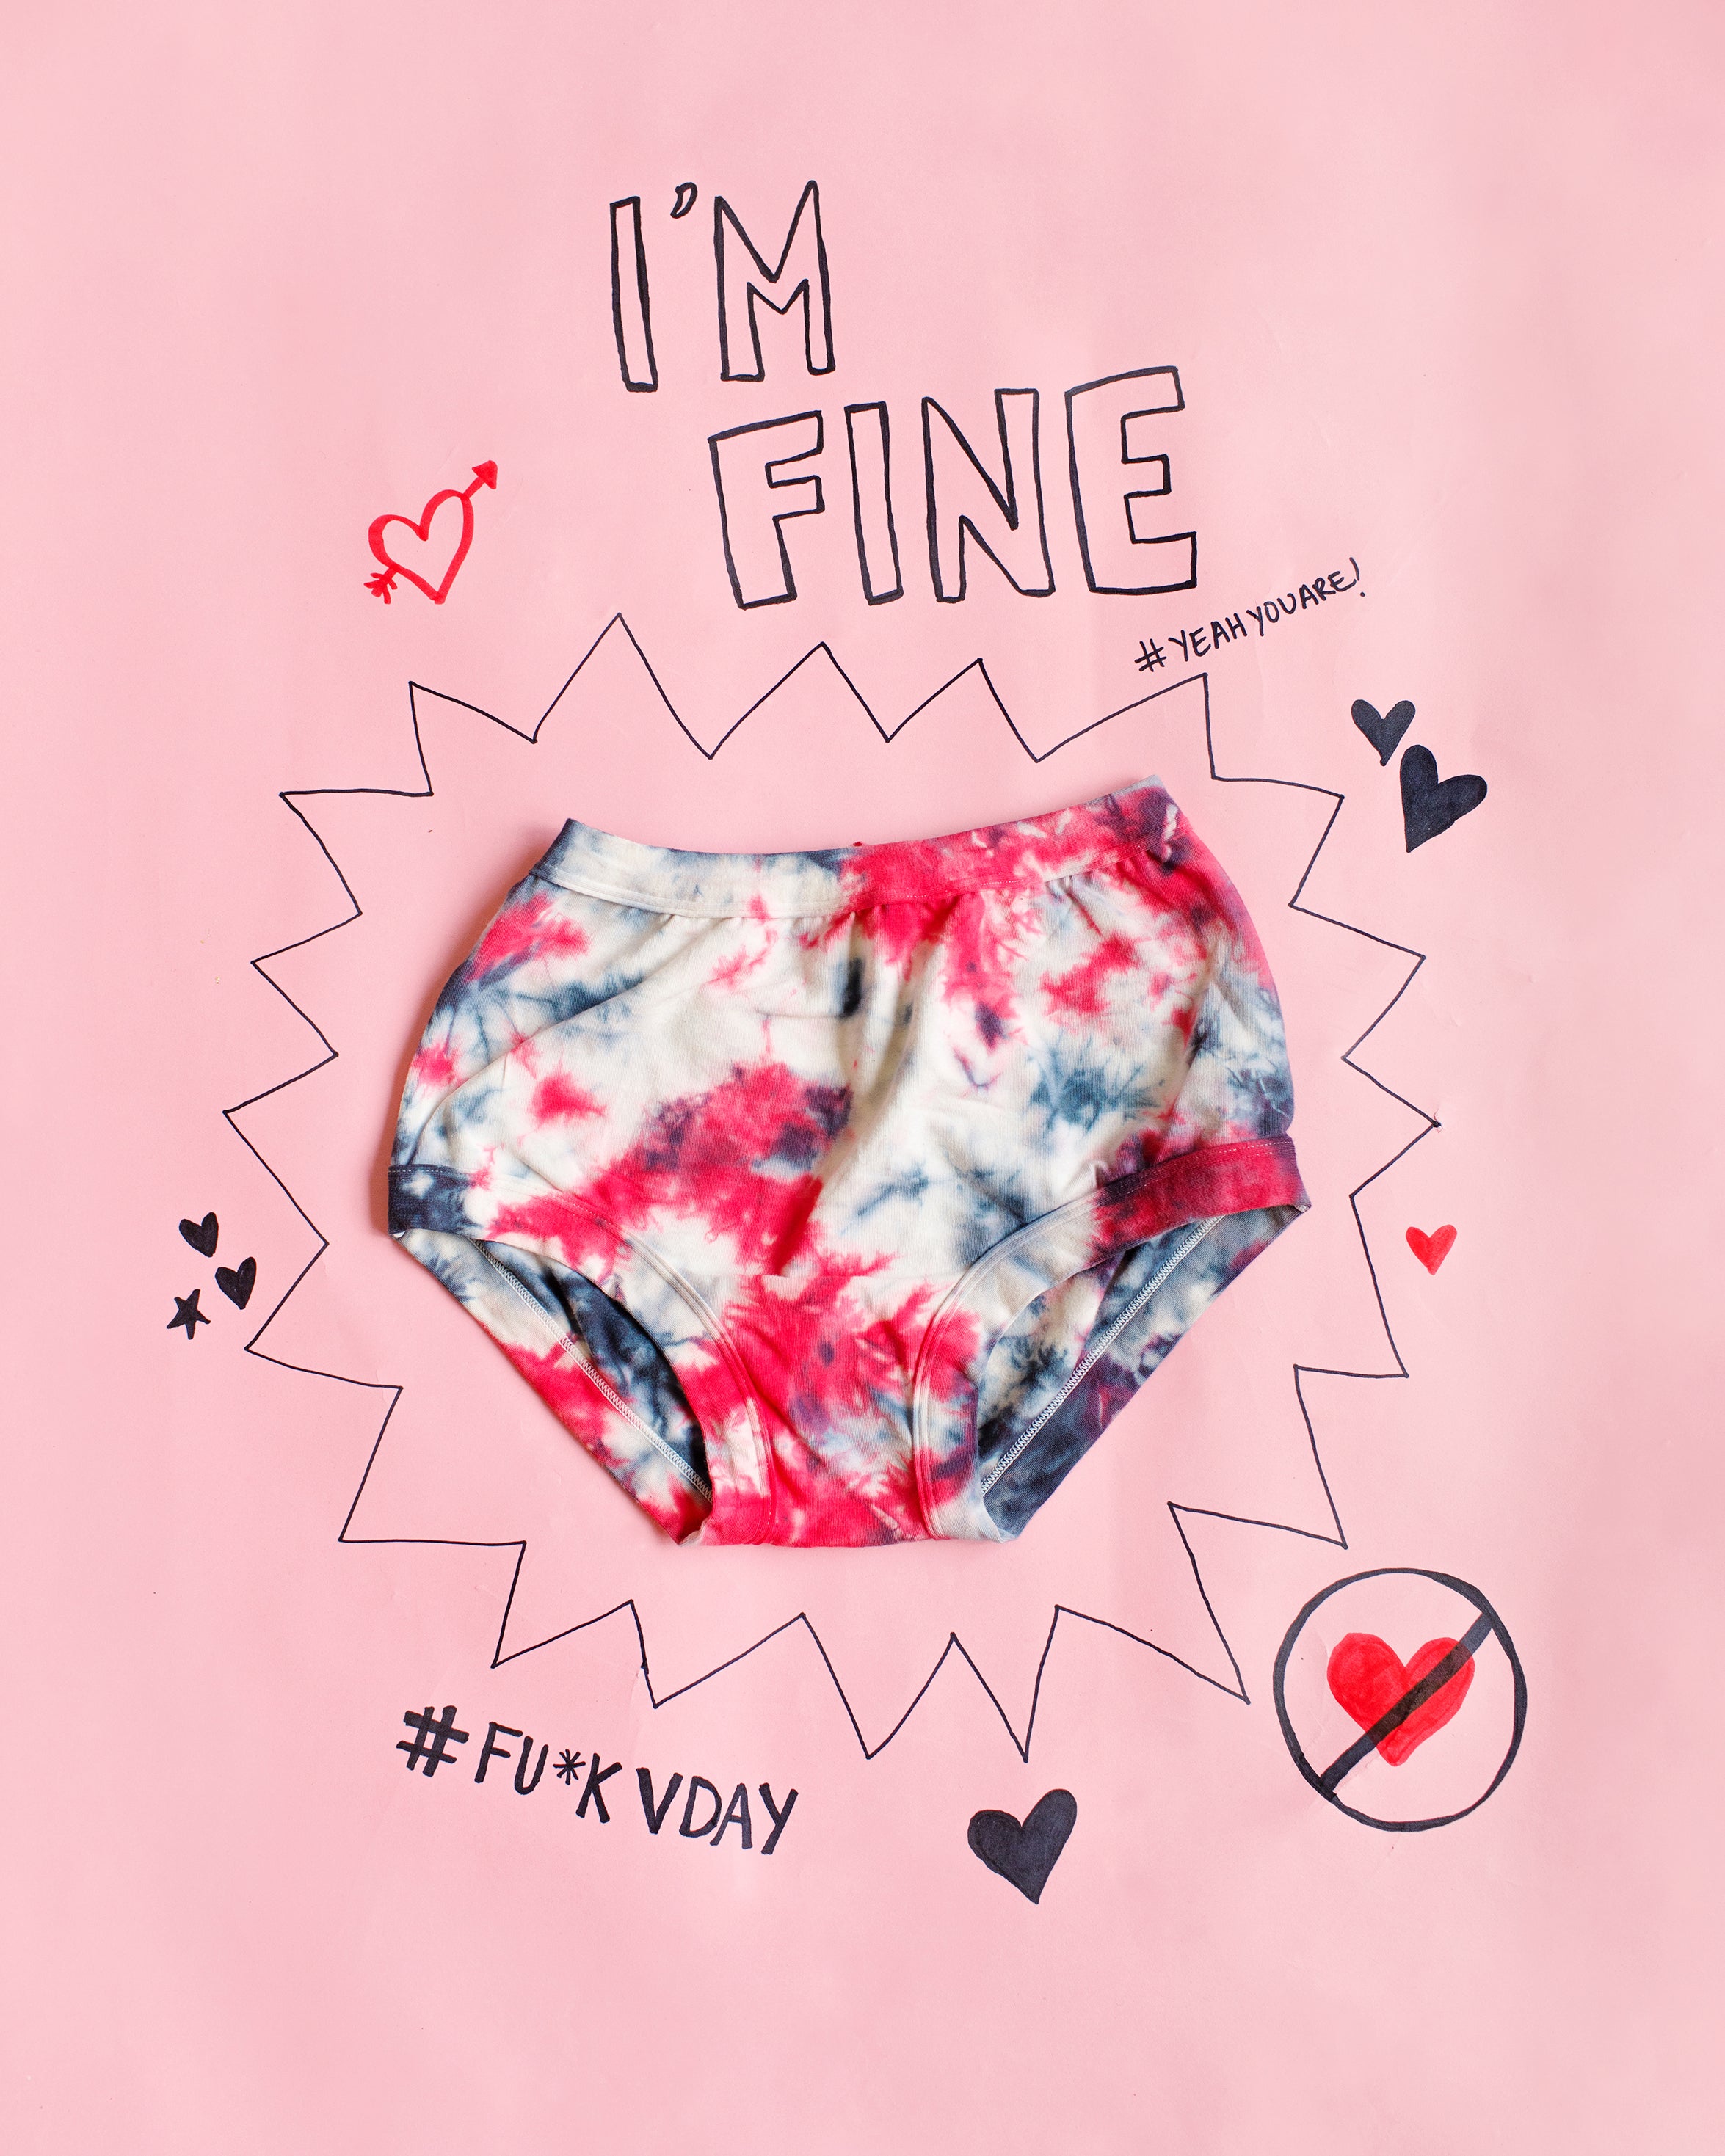 Flat lay of Original style underwear in black, red, and white scrunch dye on a pink background with writing.